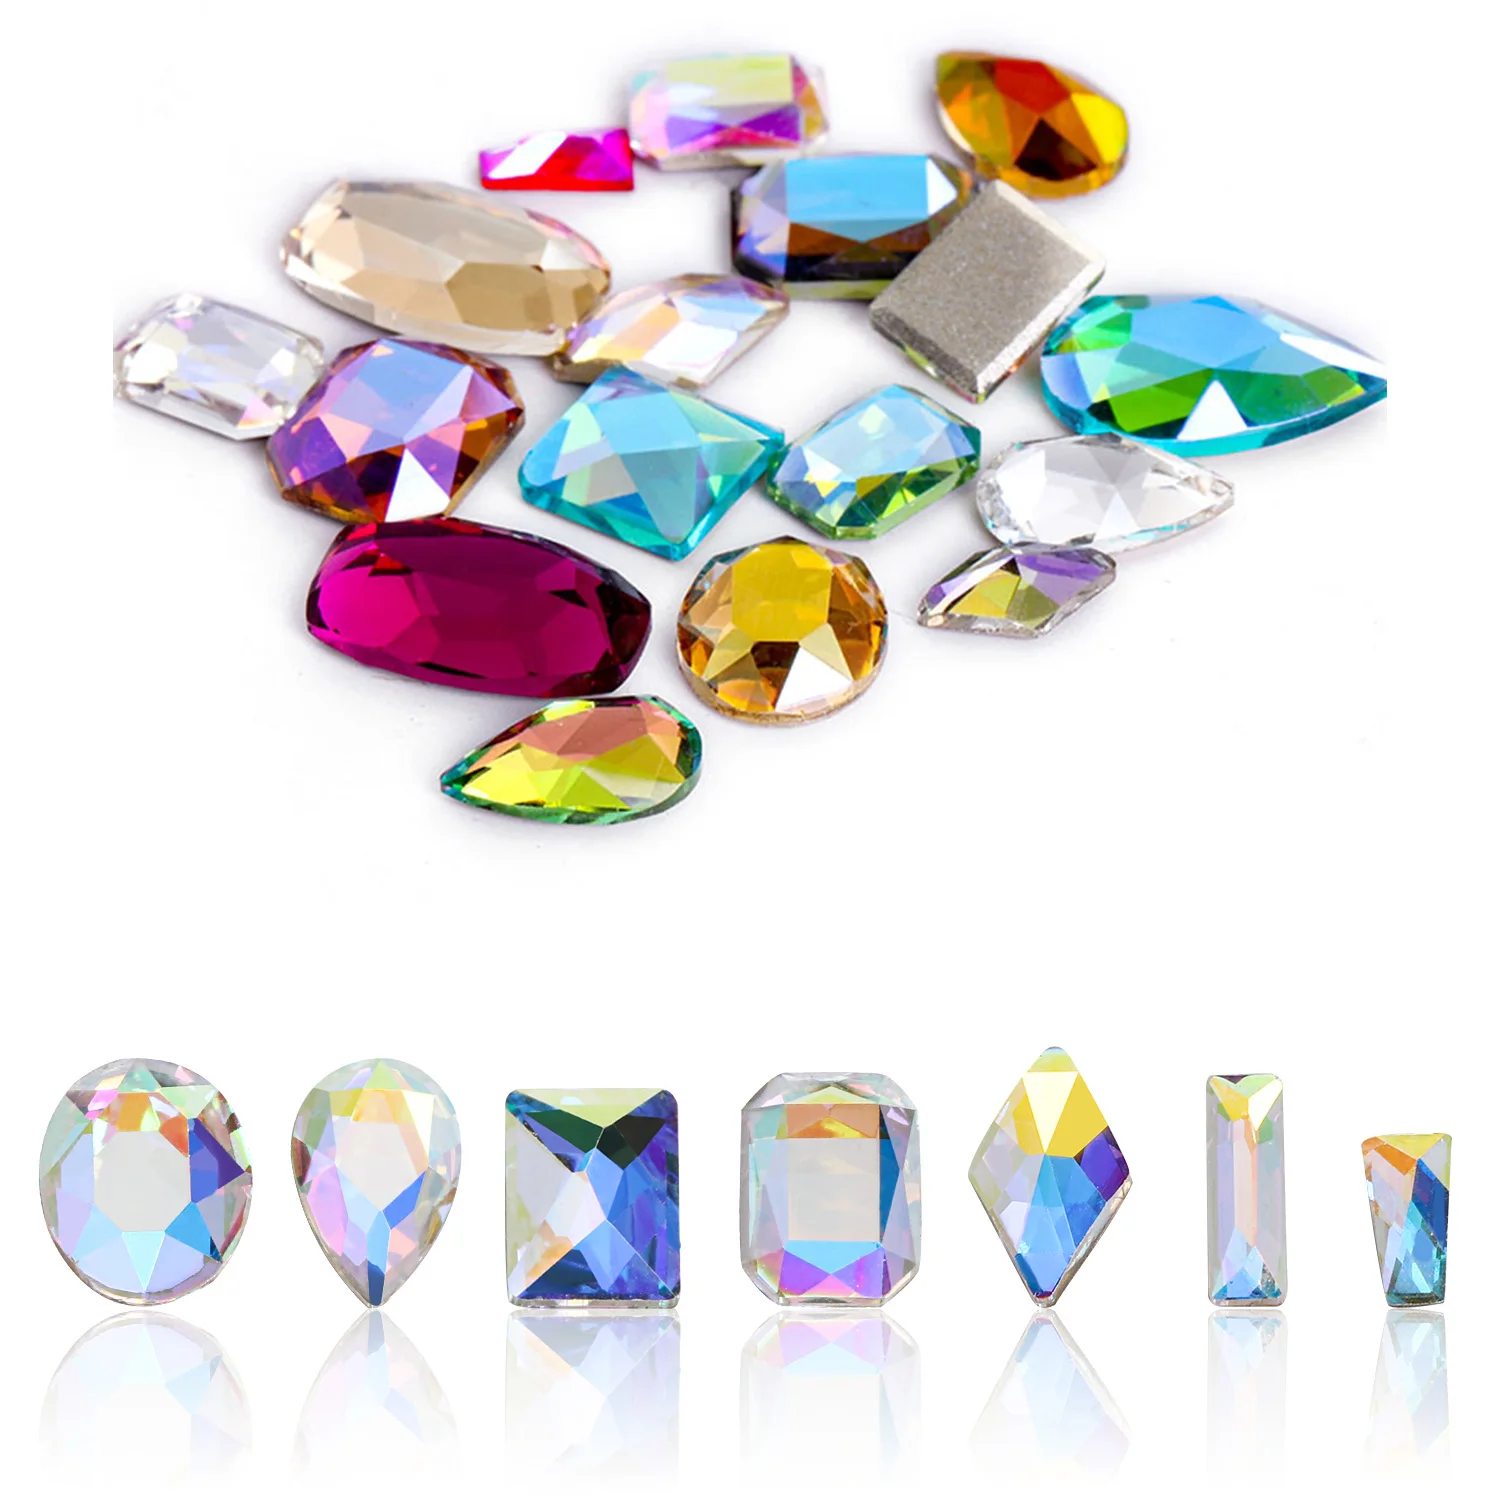 

Xichuan Fancy shapes 20 colors flat back chamfered crystal stones glass jewelry crafts DIY nail art supplies strass rhinestones